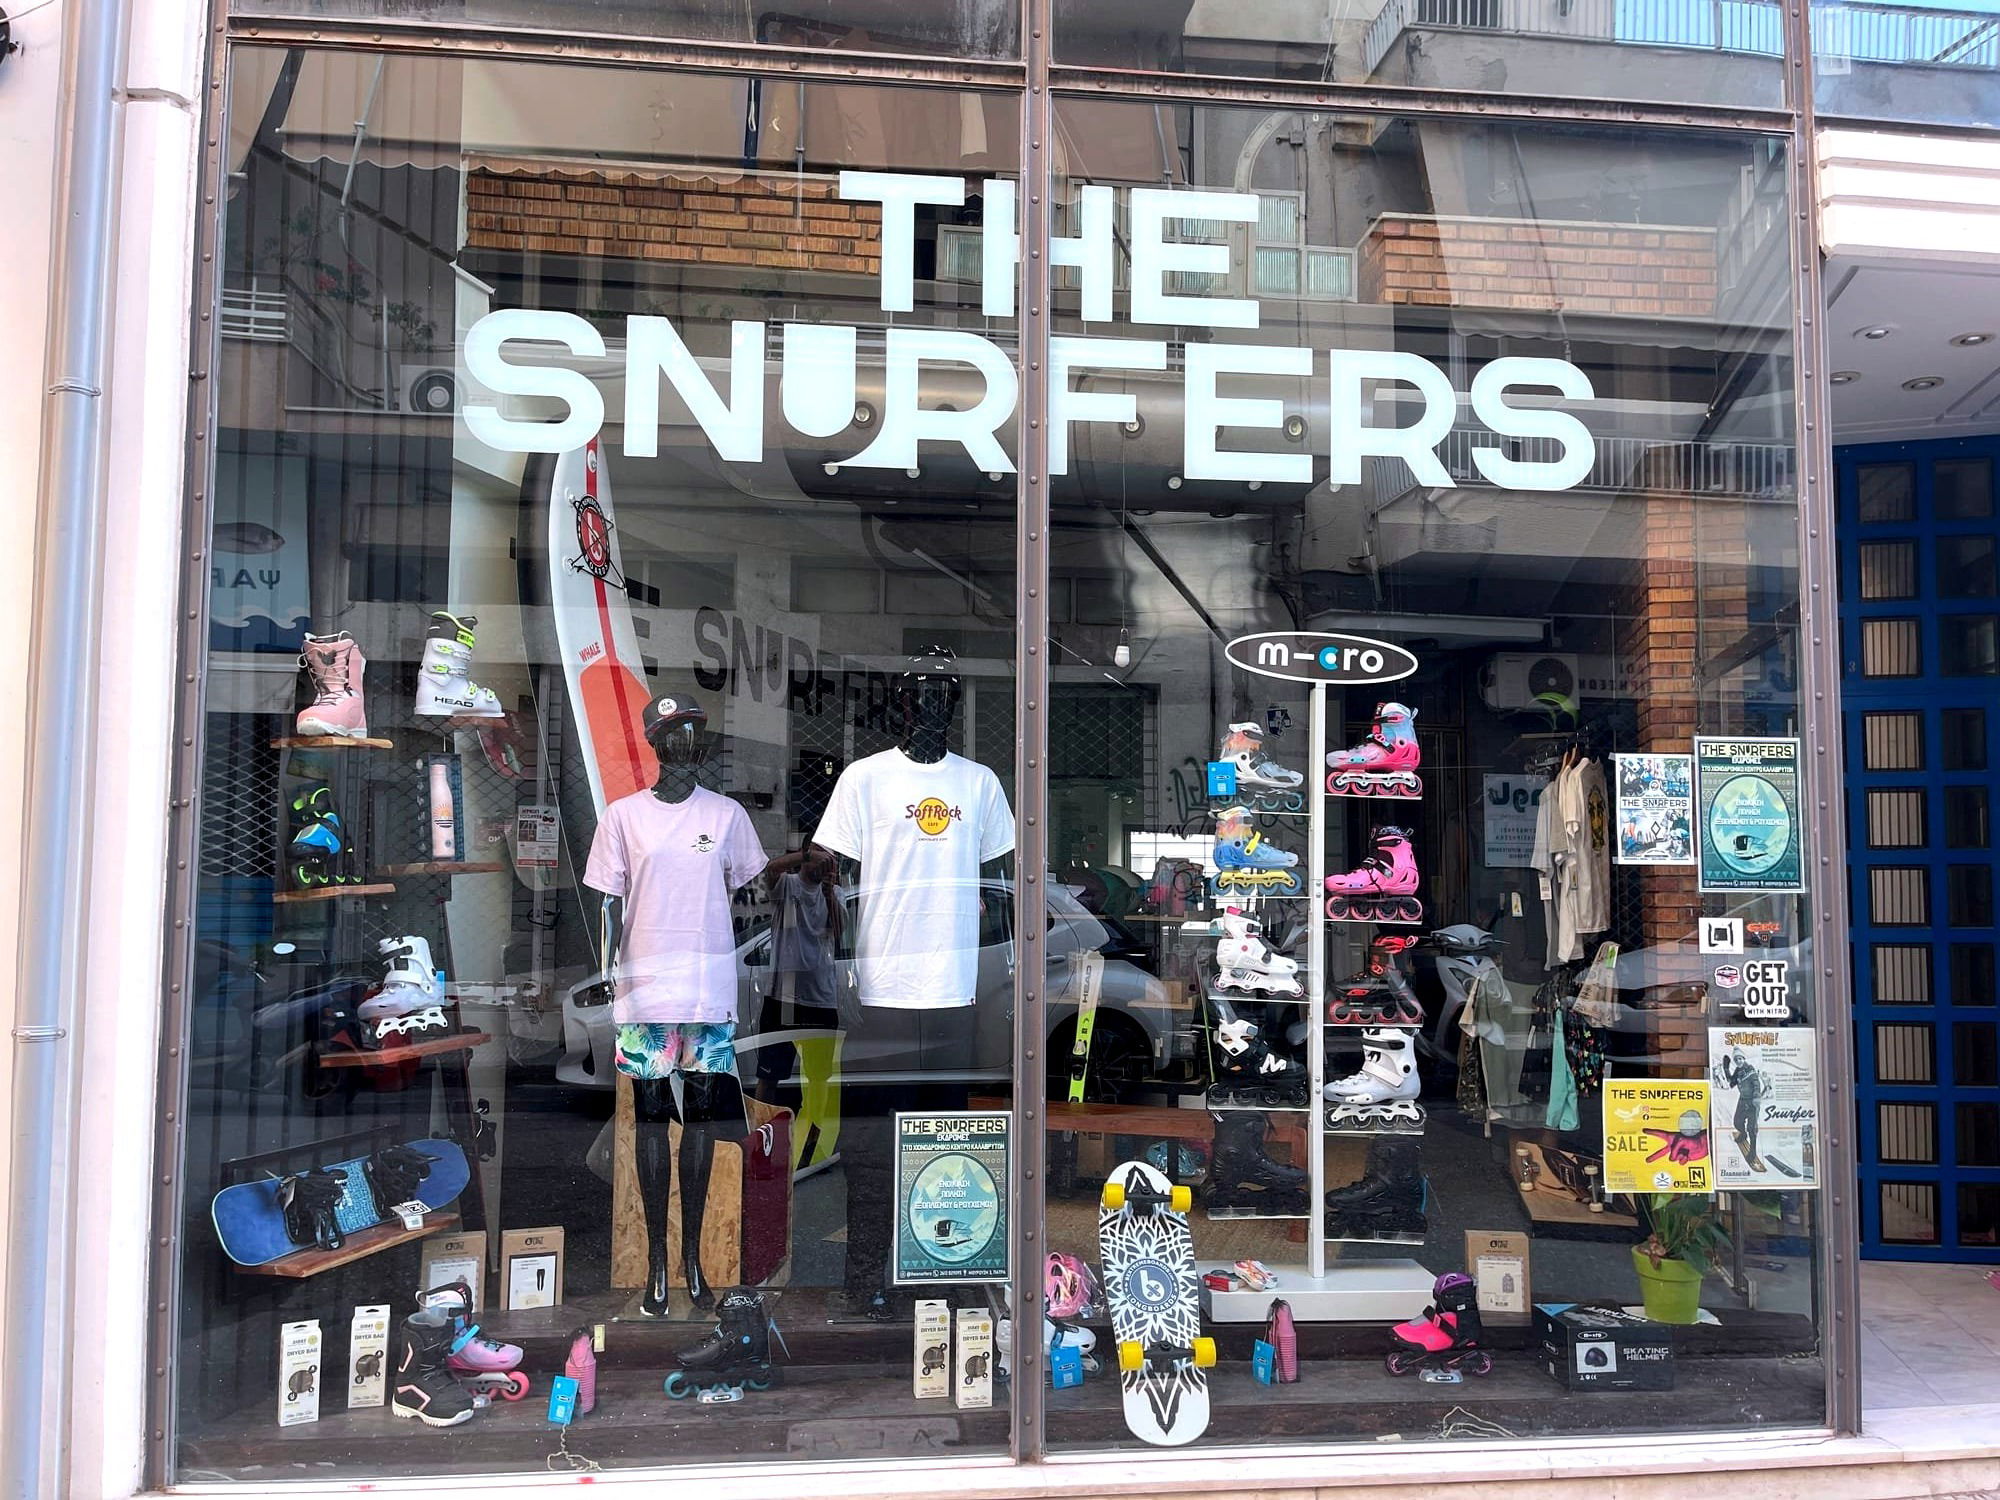 The Snurfers local shop